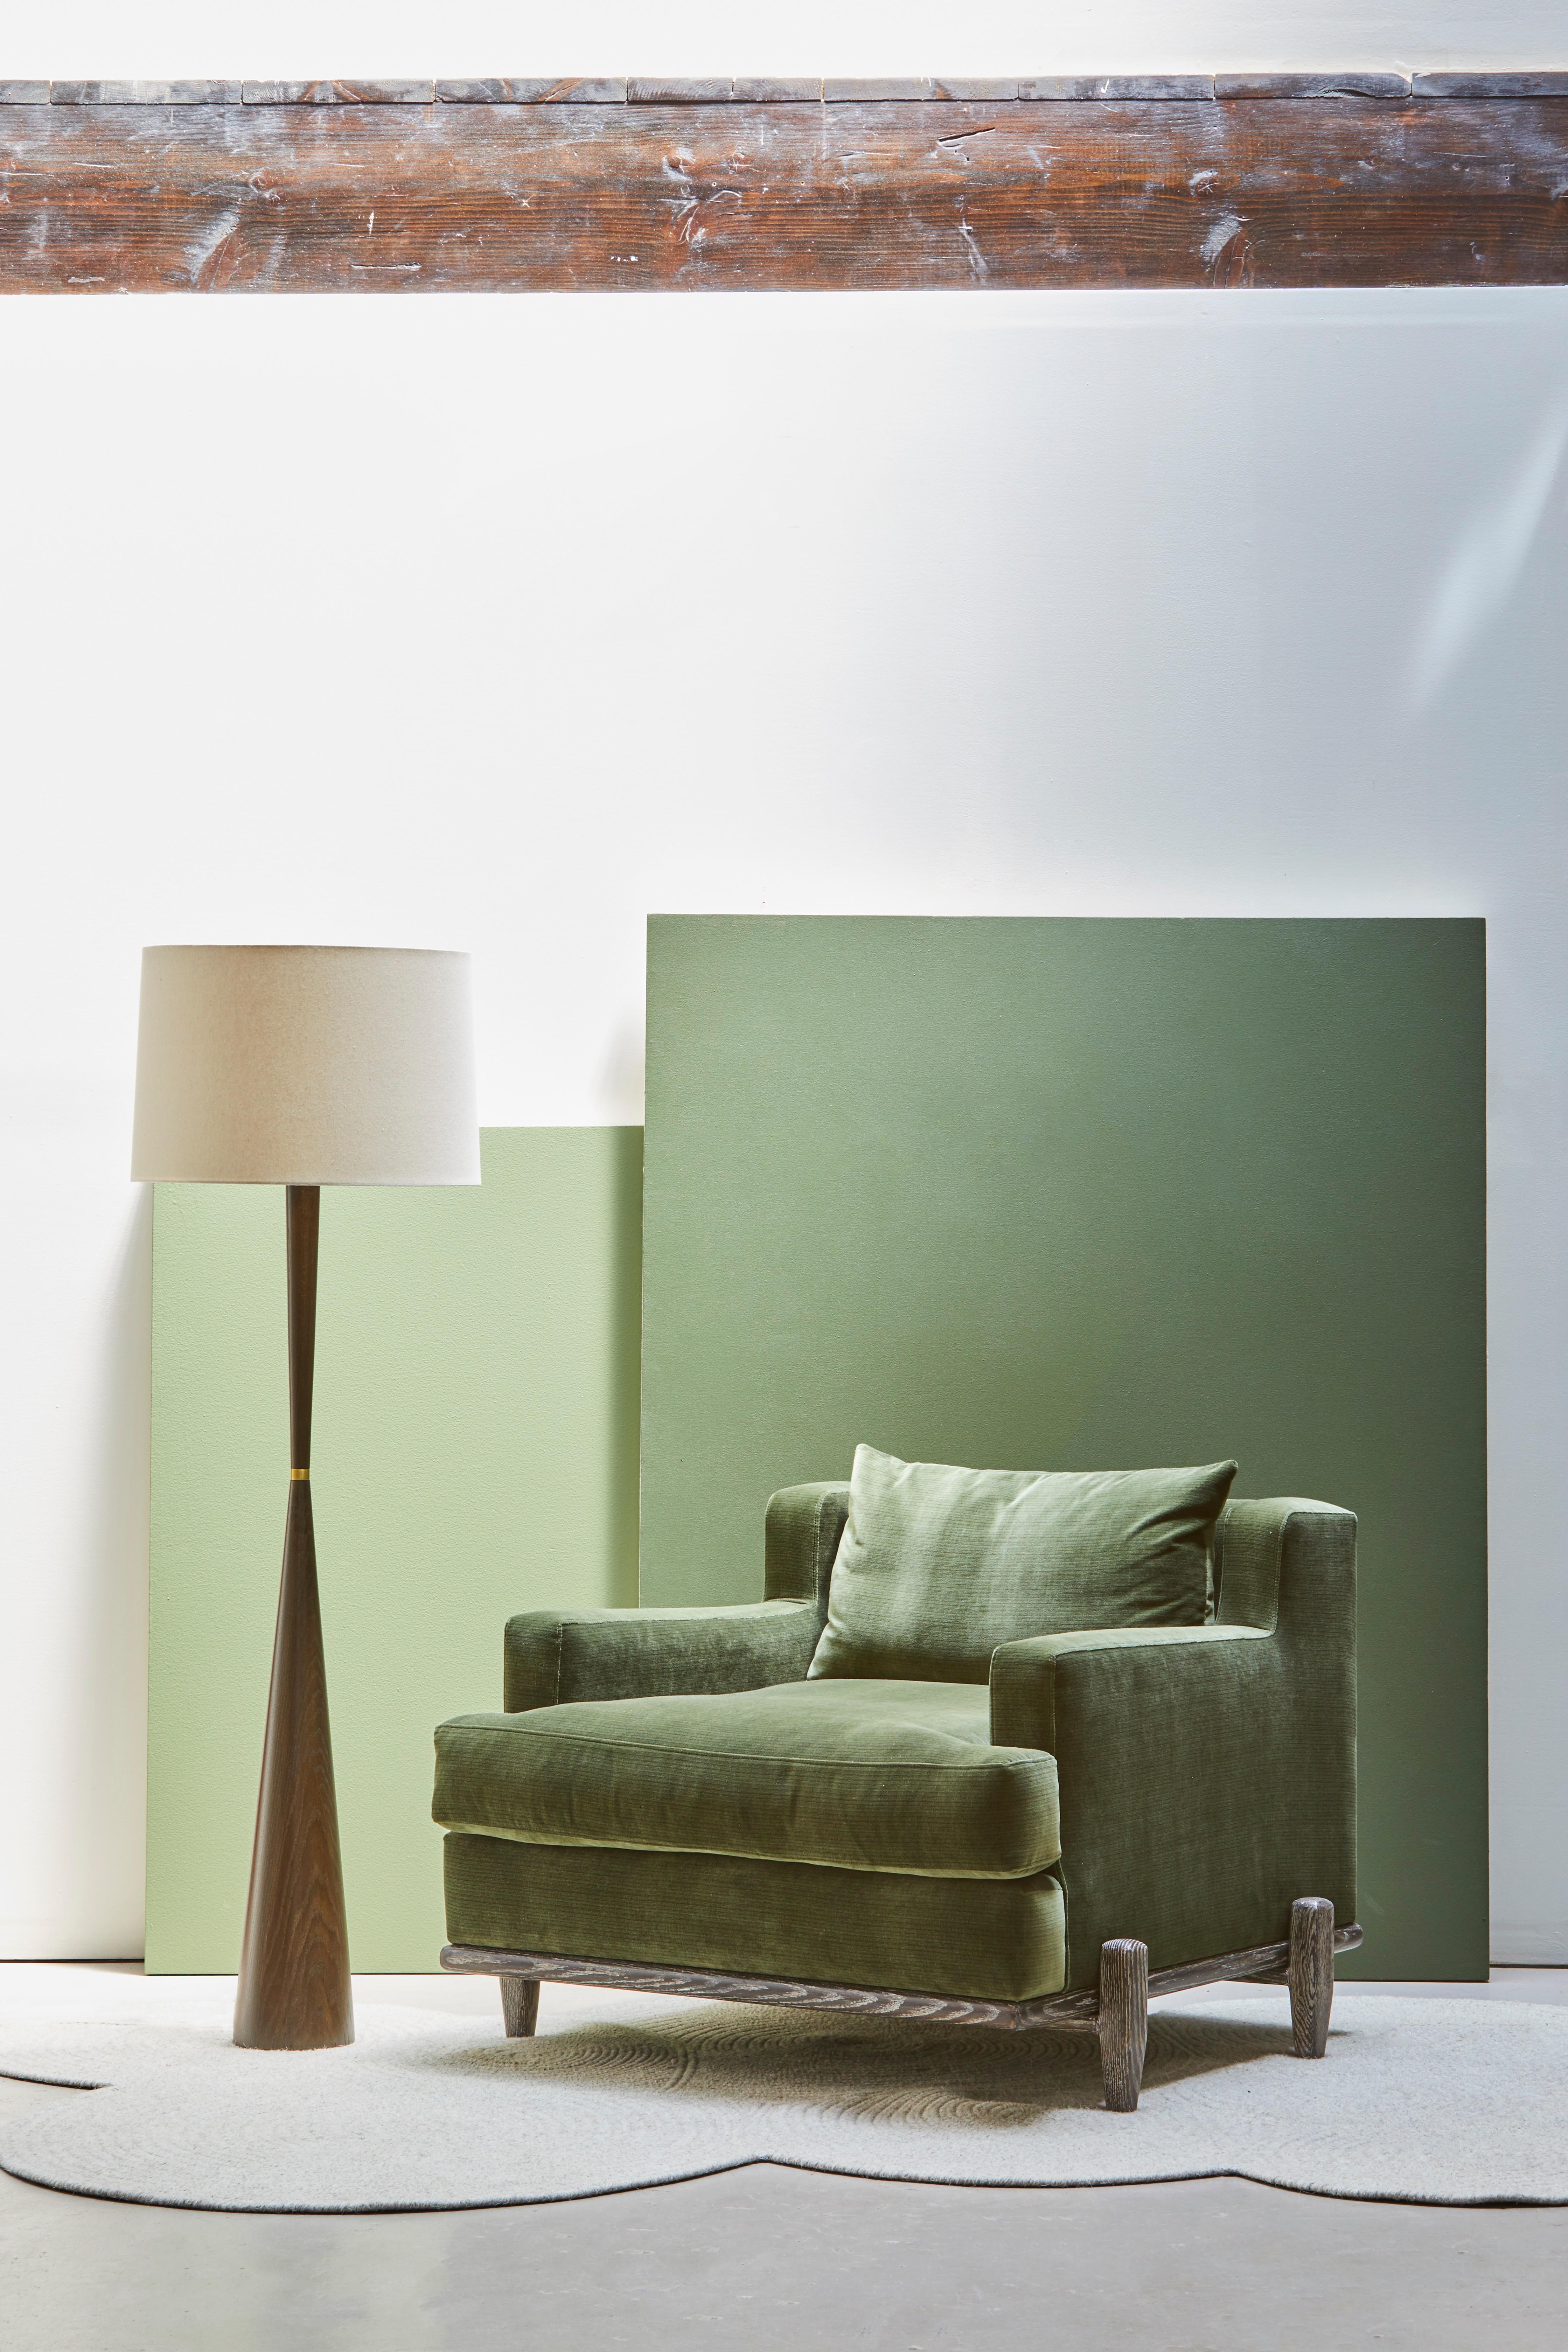 George Chair by Brian Paquette for Lawson-Fenning 1